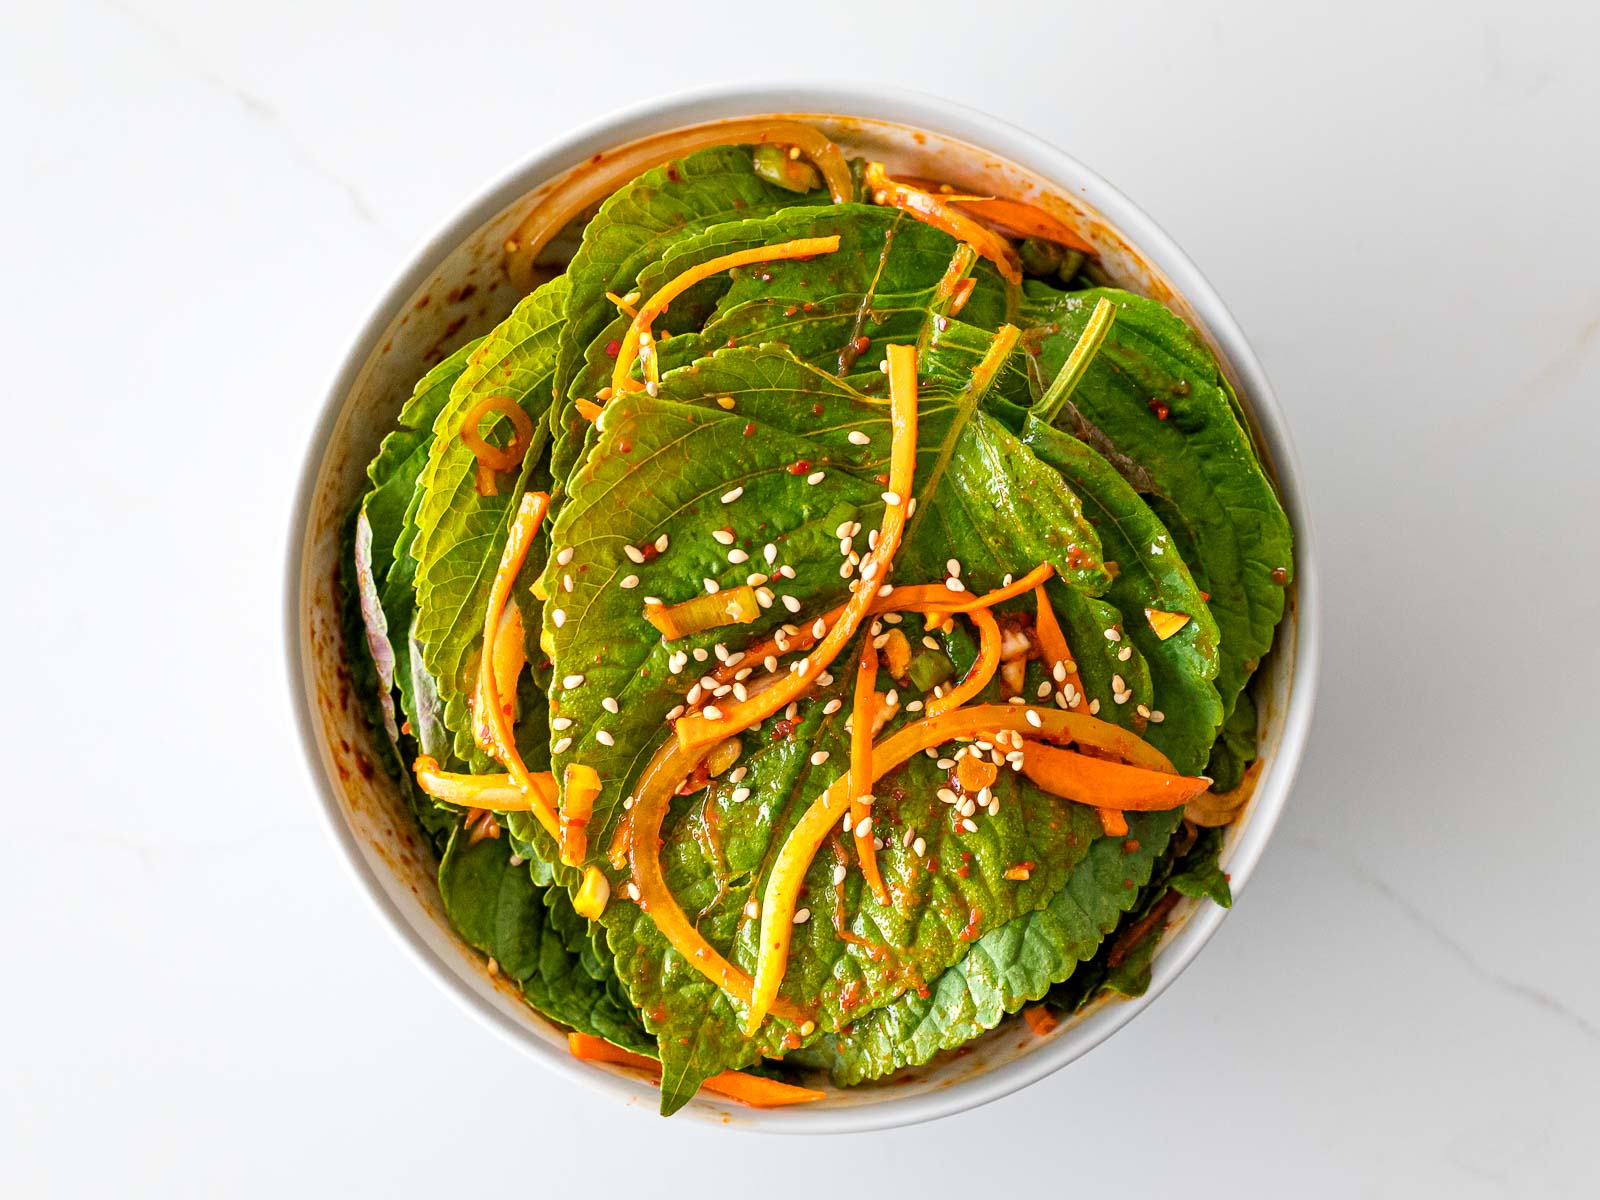 Korean perilla leaf kimchi in a white bowl with shredded carrots and sesame seeds